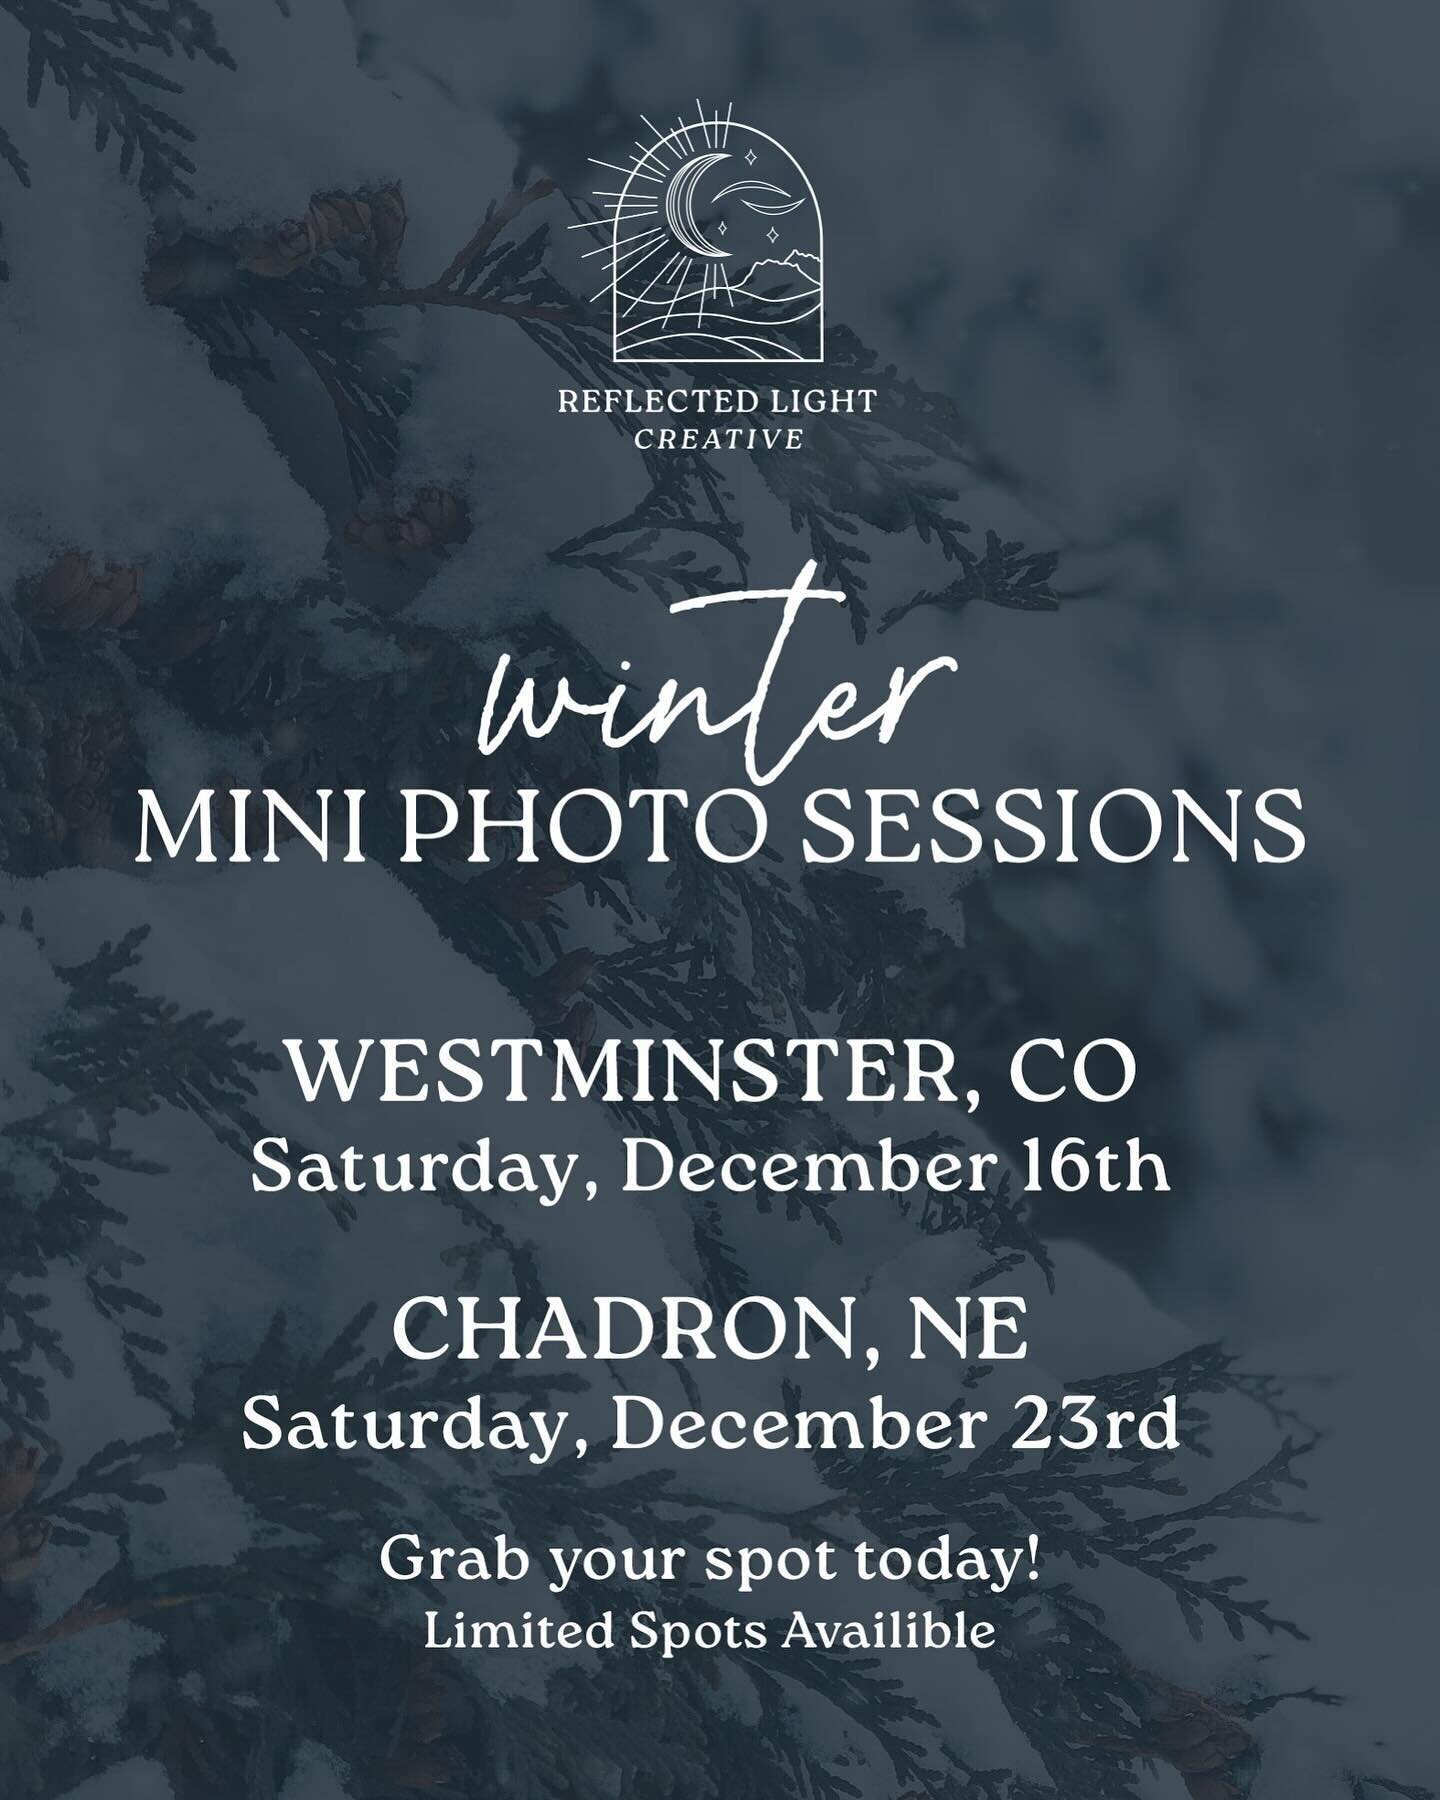 NOW BOOKING 
Winter Mini Photos

This year we will be offering two locations. 
Westminster, CO &ndash; December 16th
Chadron, NE &ndash; December 23rd

It may be chilly, but winter can be a fun time to update your family photos. Unless there i